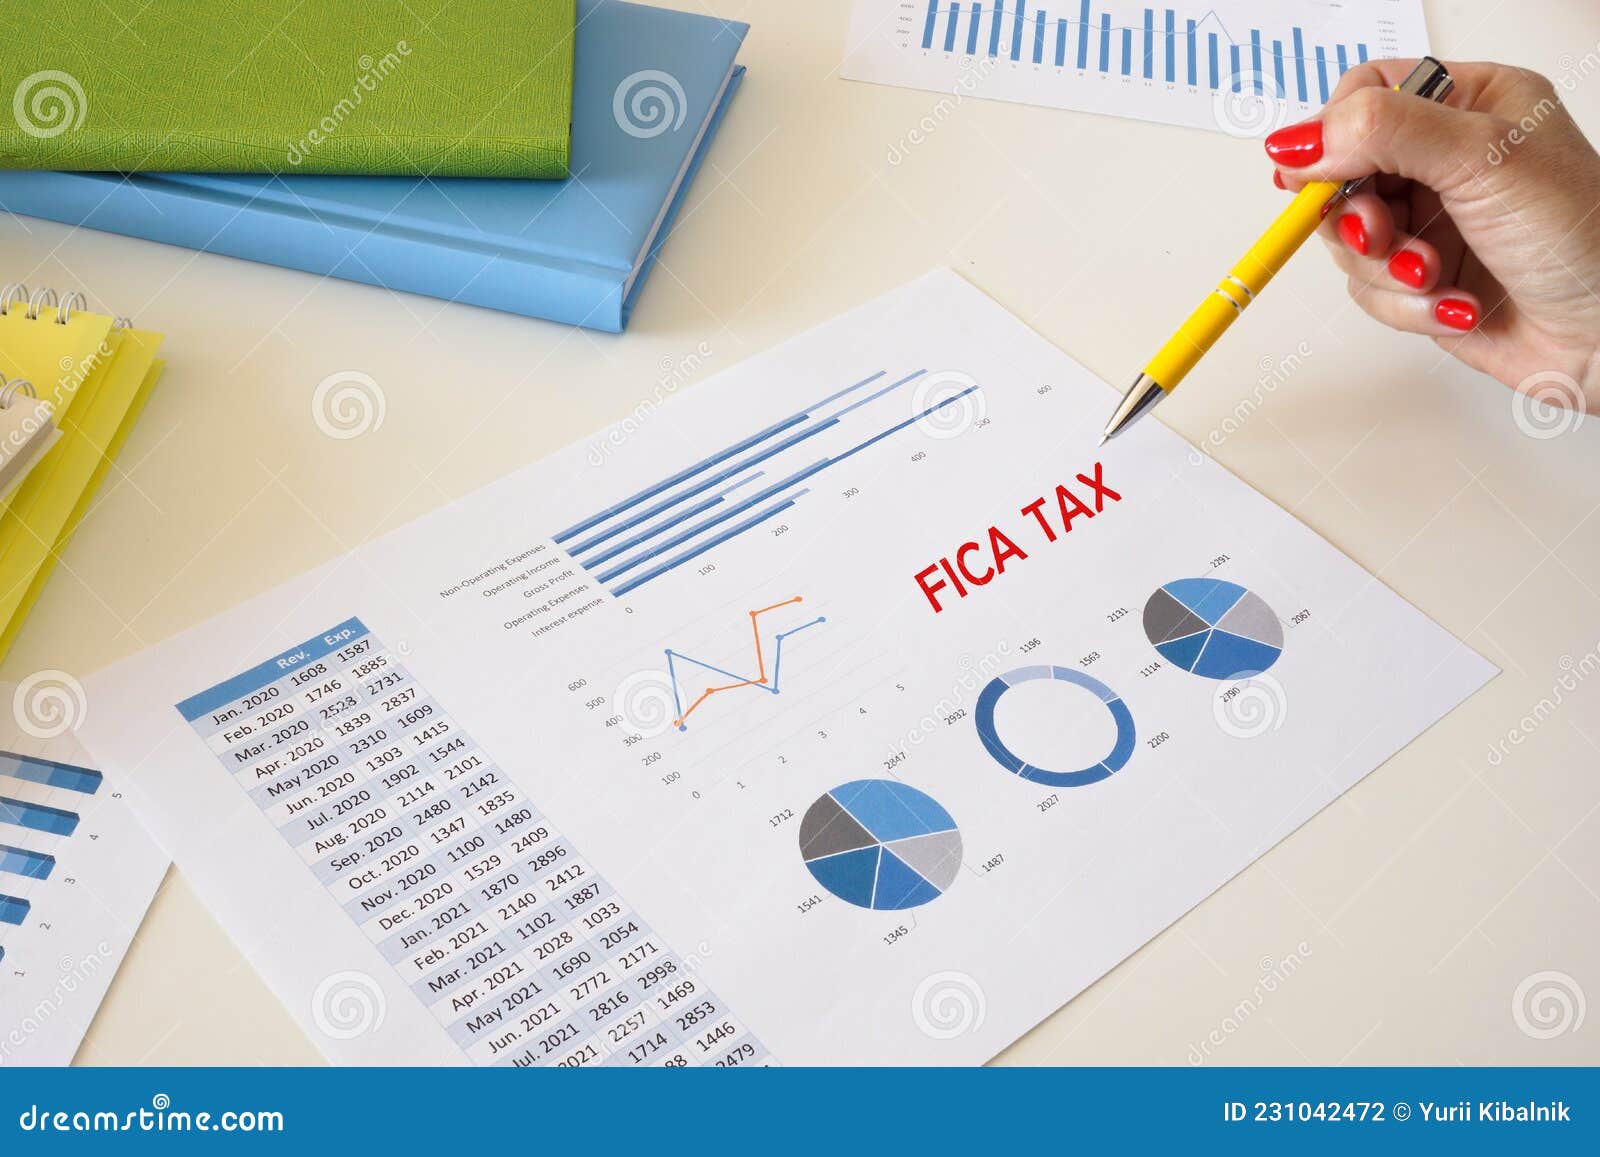 business concept meaning fica tax federal insurance contributions act with sign on the page